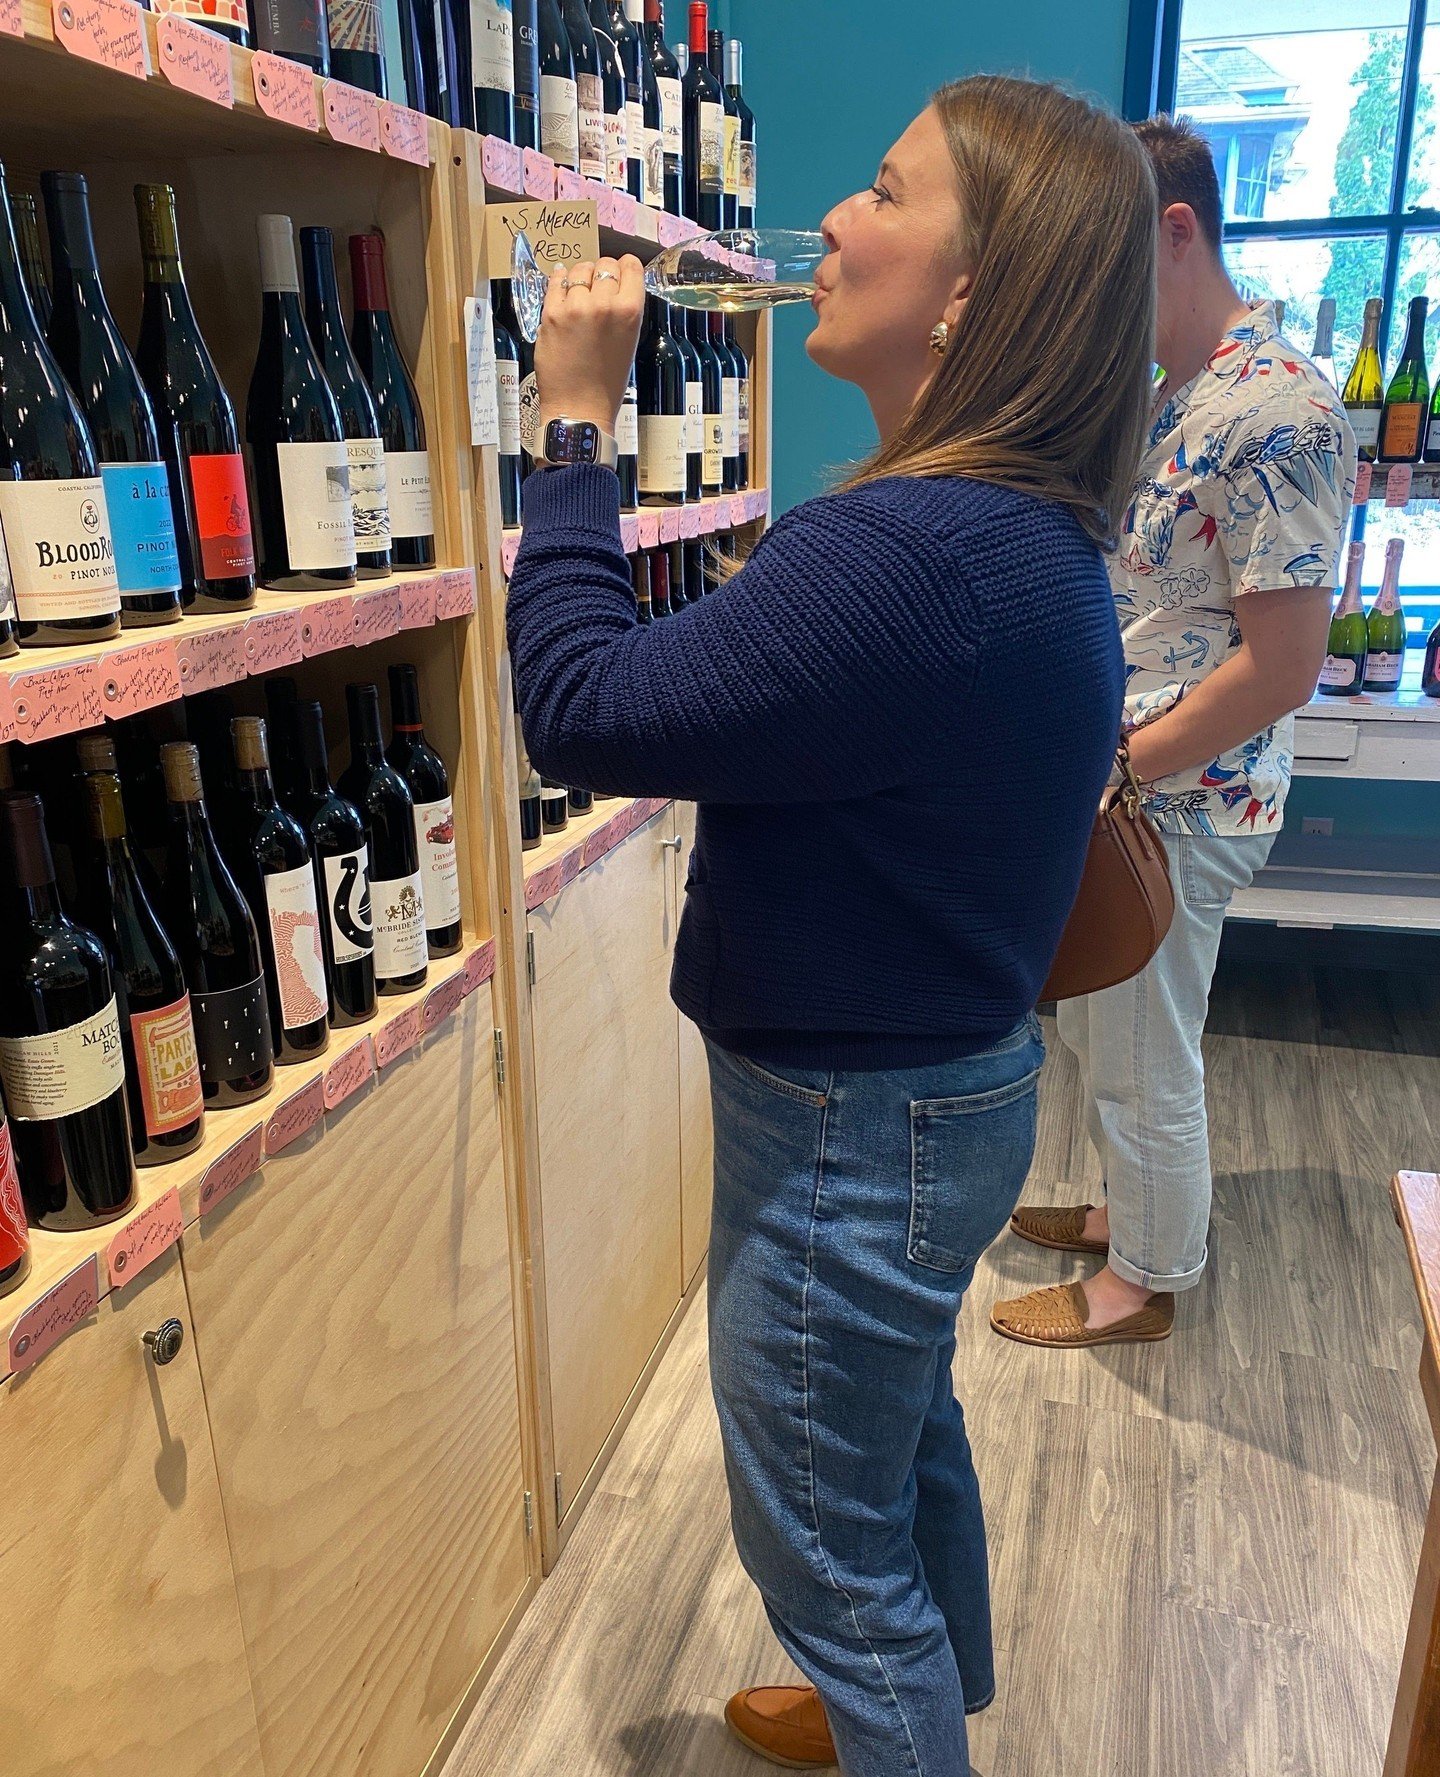 Is there anything better than sipping on a glass of wine while also shopping for wine? If this sounds like your dream scenario, then you've got to come visit us at Table Wine in the Atwood Neighborhood. We're a cozy wine bar and store in the heart of